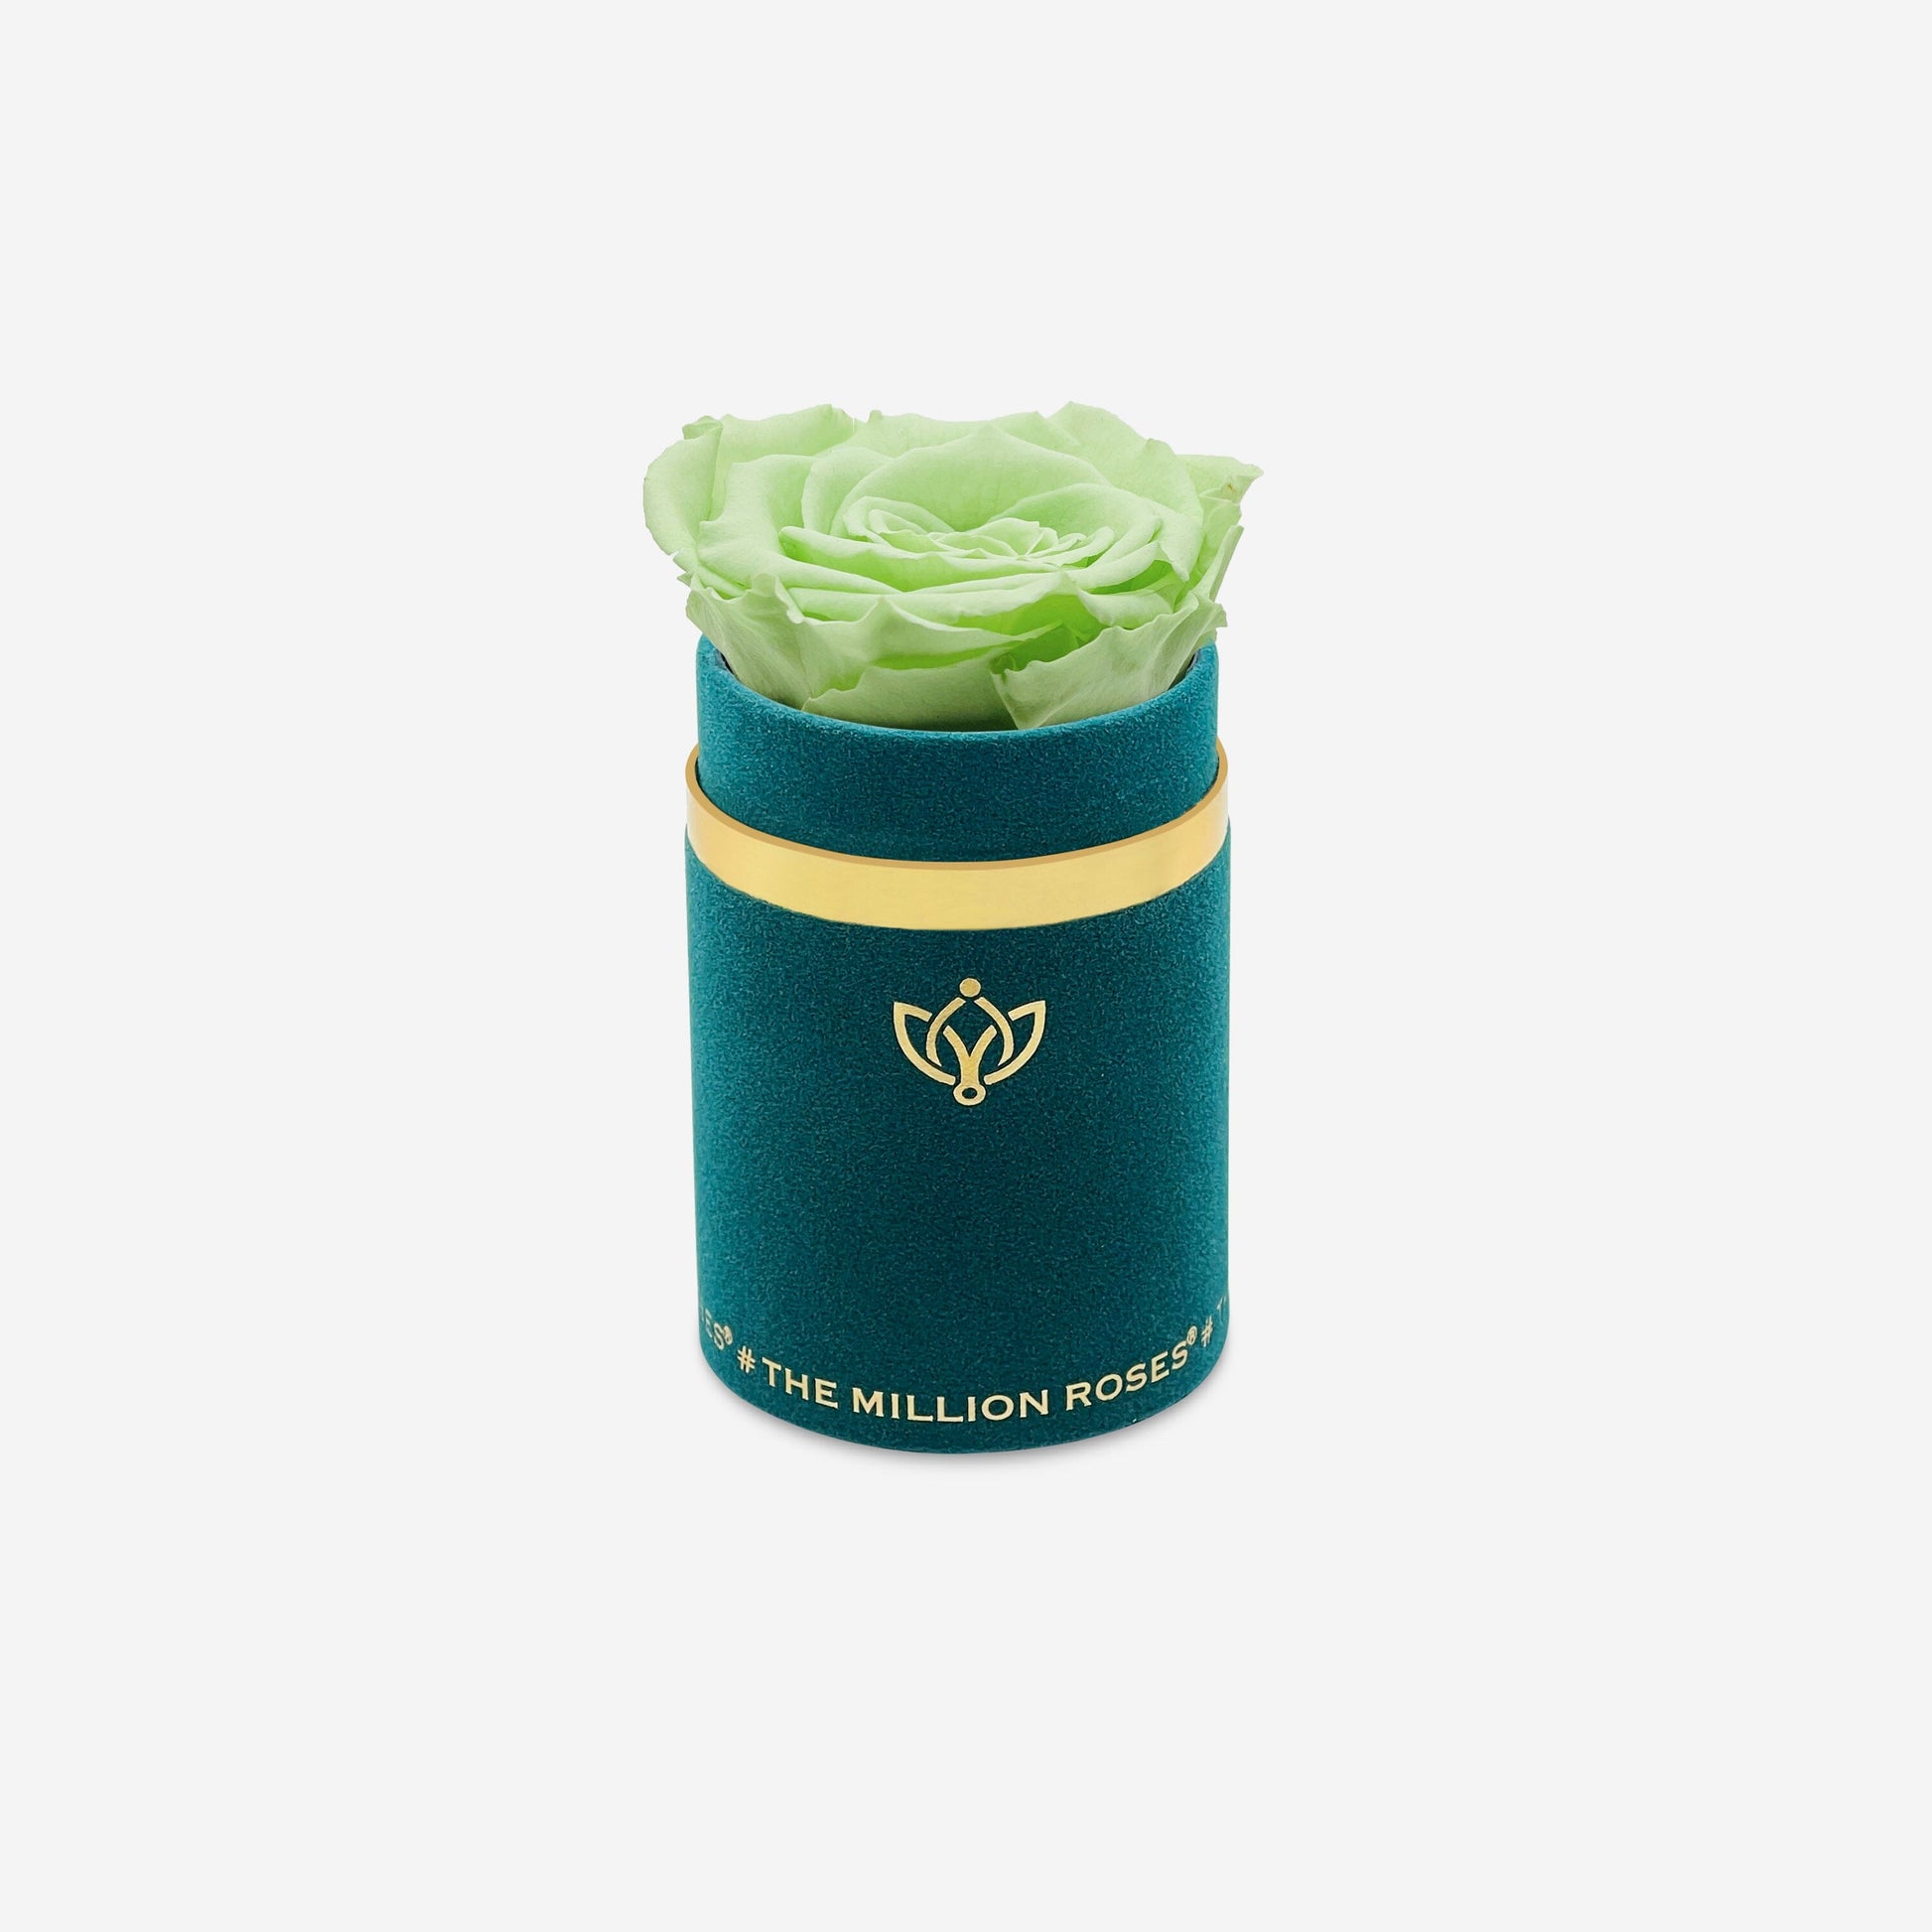 Single Dark Green Suede Box | Mint Green Rose - The Million Roses